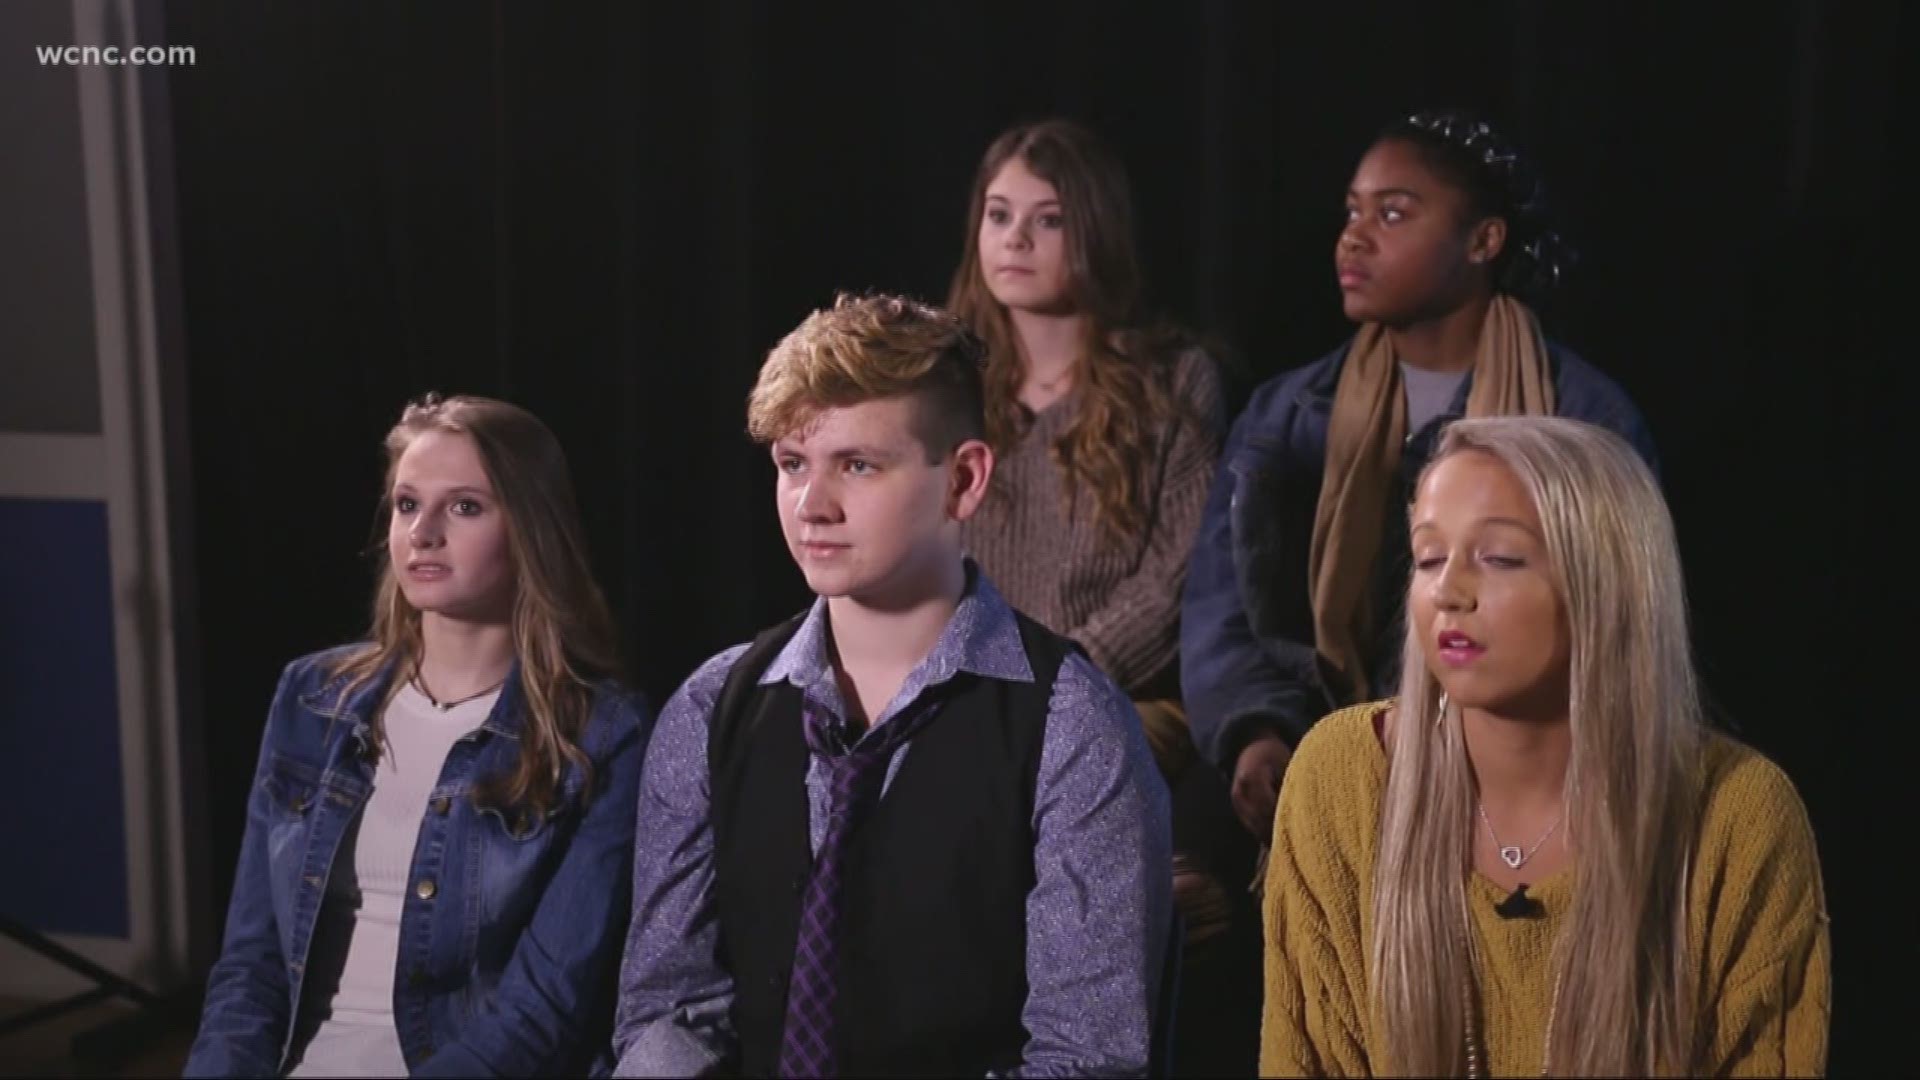 Every day nine people are killed and over 1,000 hurt in crashes involving distracted drivers, according to the CDC. WCNC gathered teens to have a discussion about distracted driving.